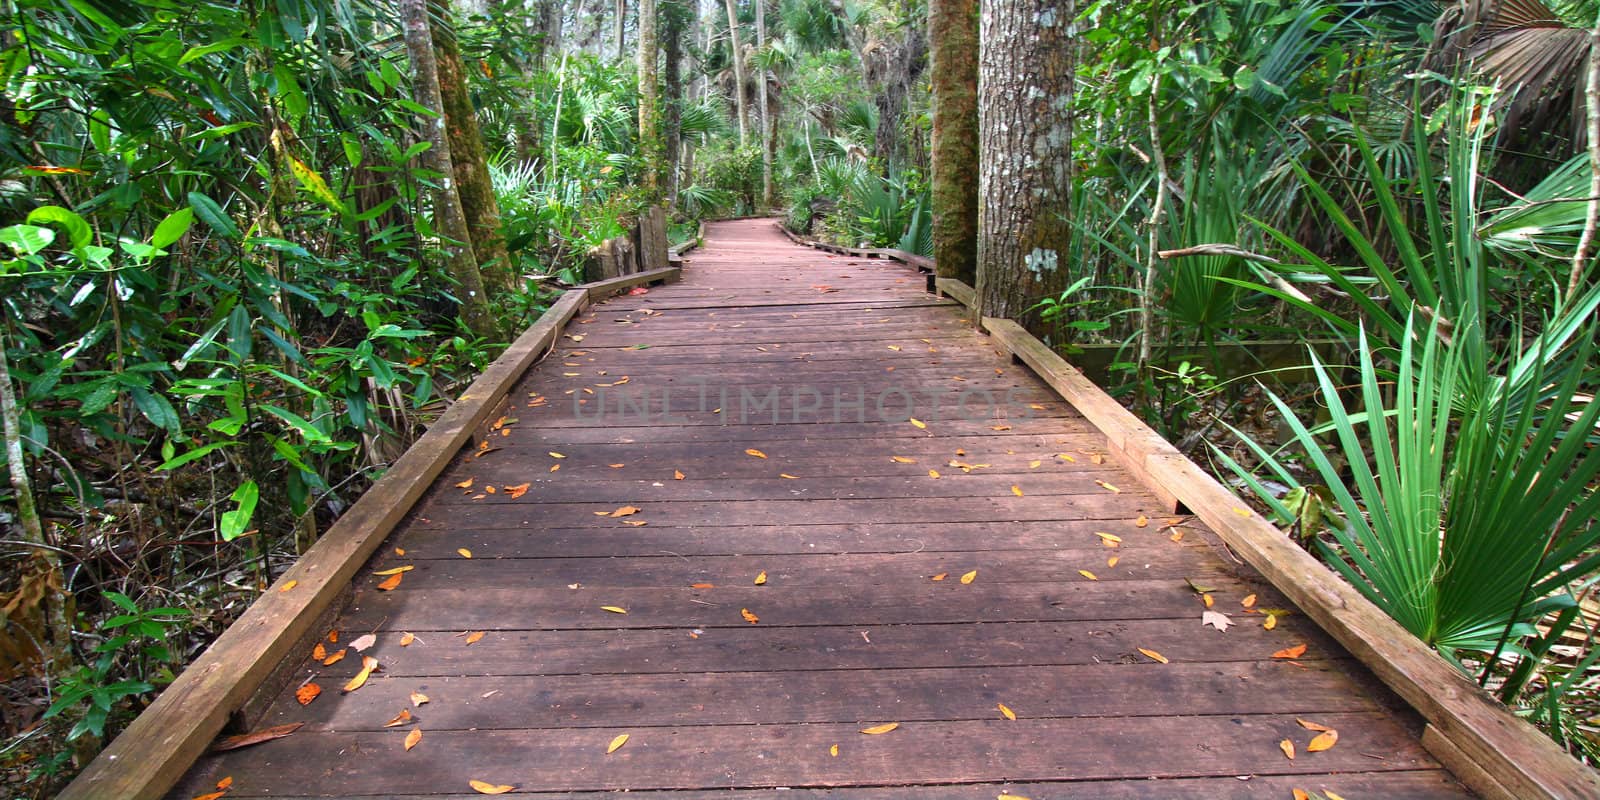 State Park Boardwalk in Florida by Wirepec